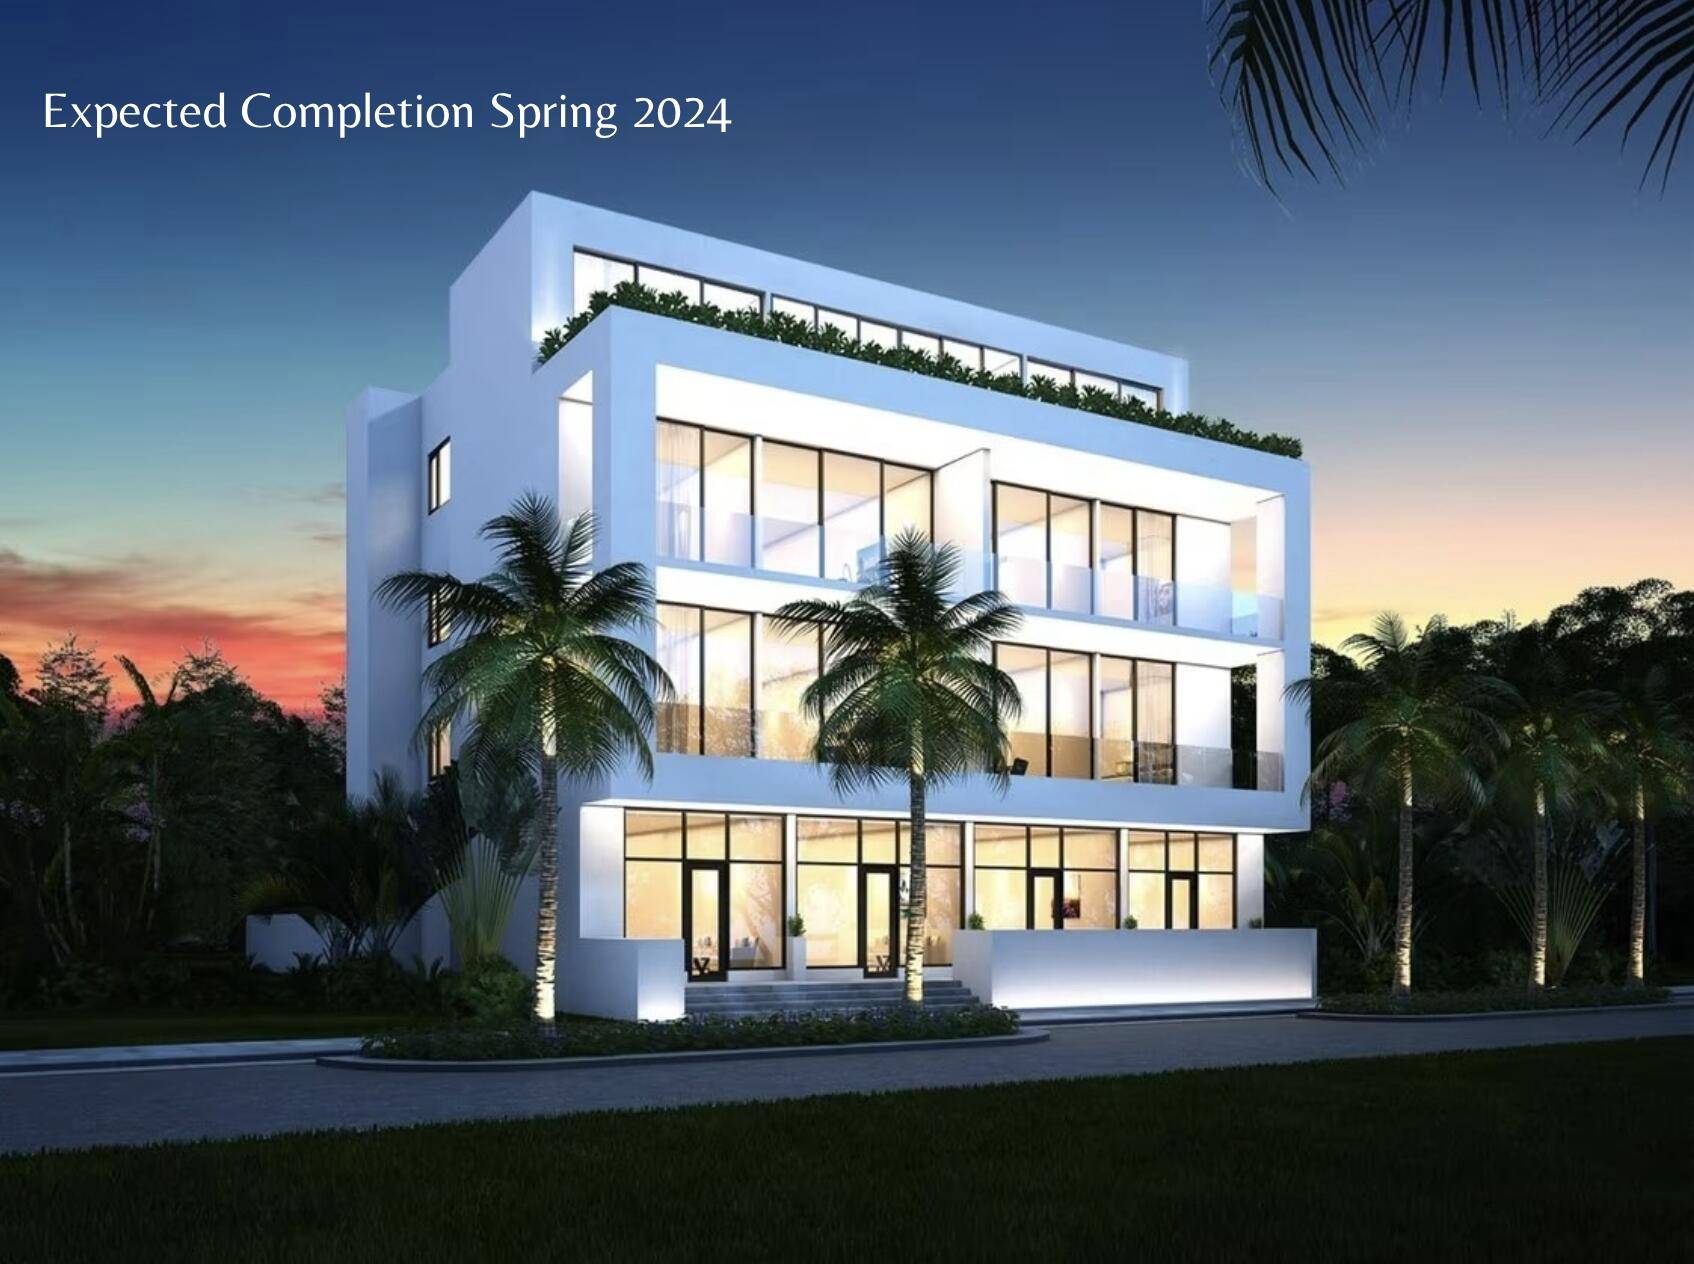 246 Aria Is expected completion in Spring of 2024.